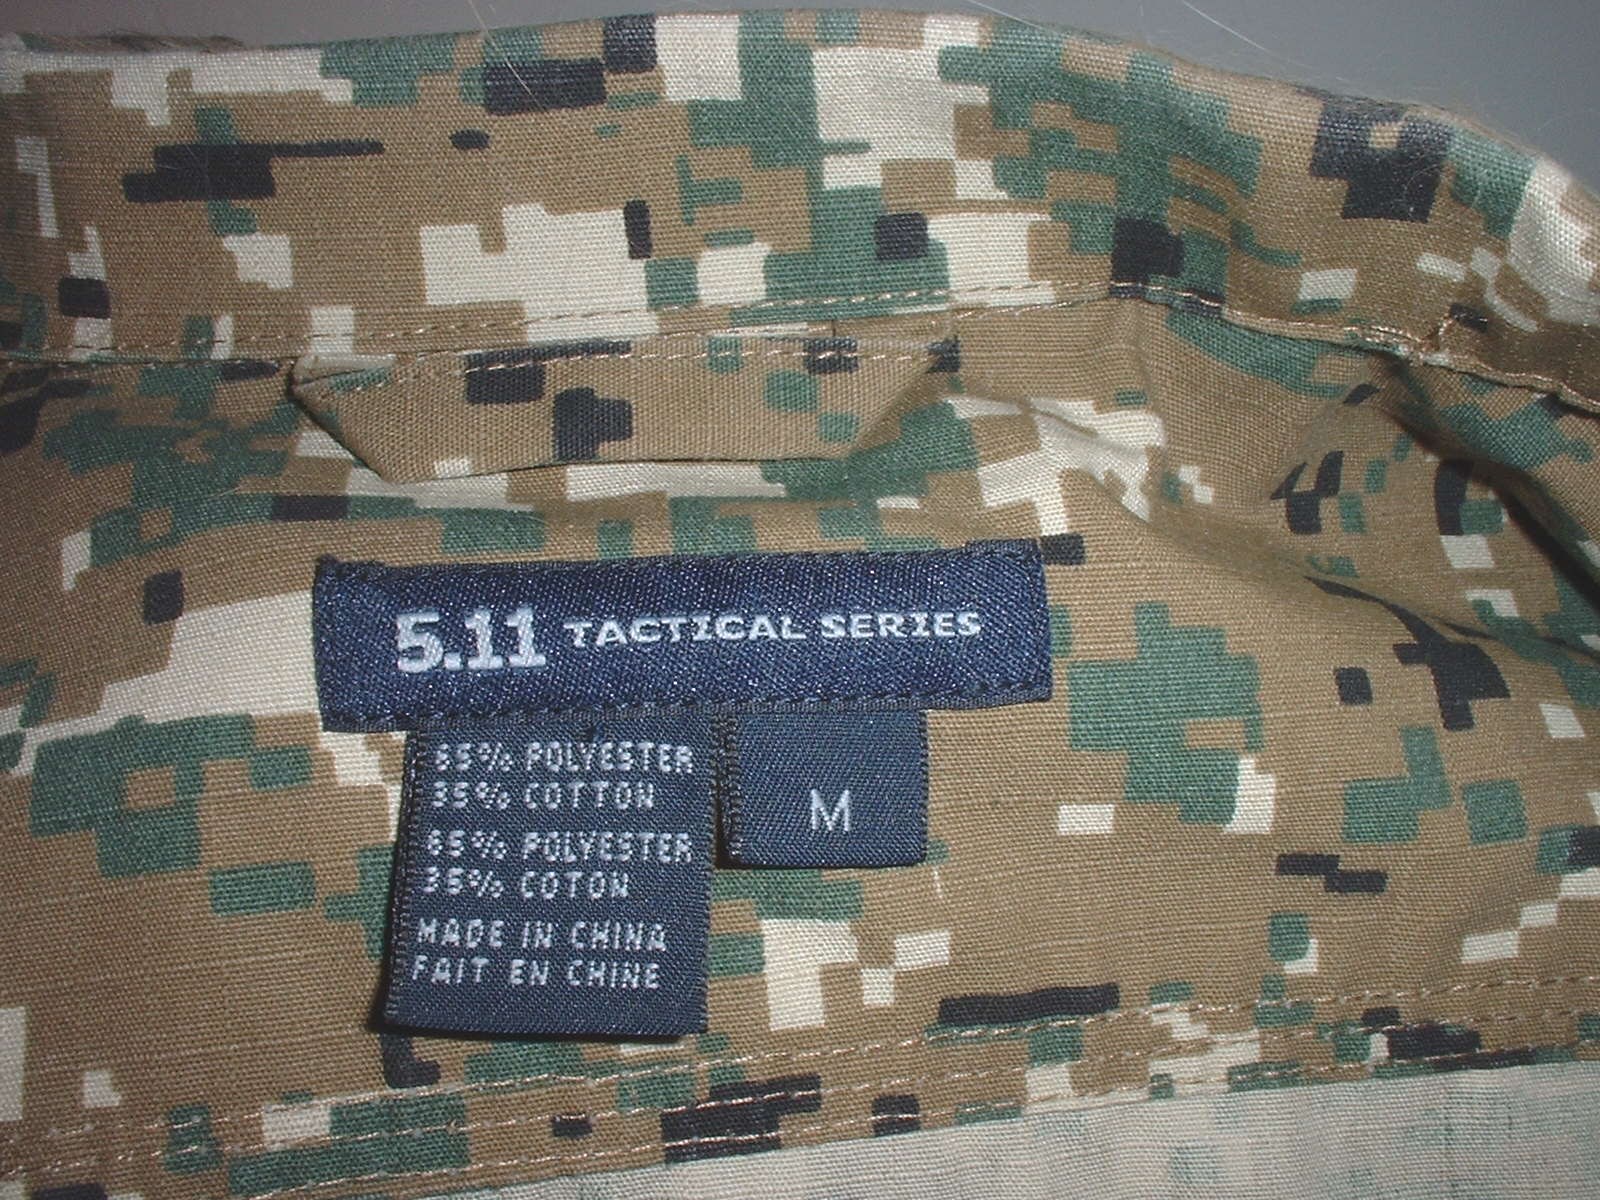 Primary image for 5.11 brand NWOT Tactical series coat/shirt forest digital, Medium